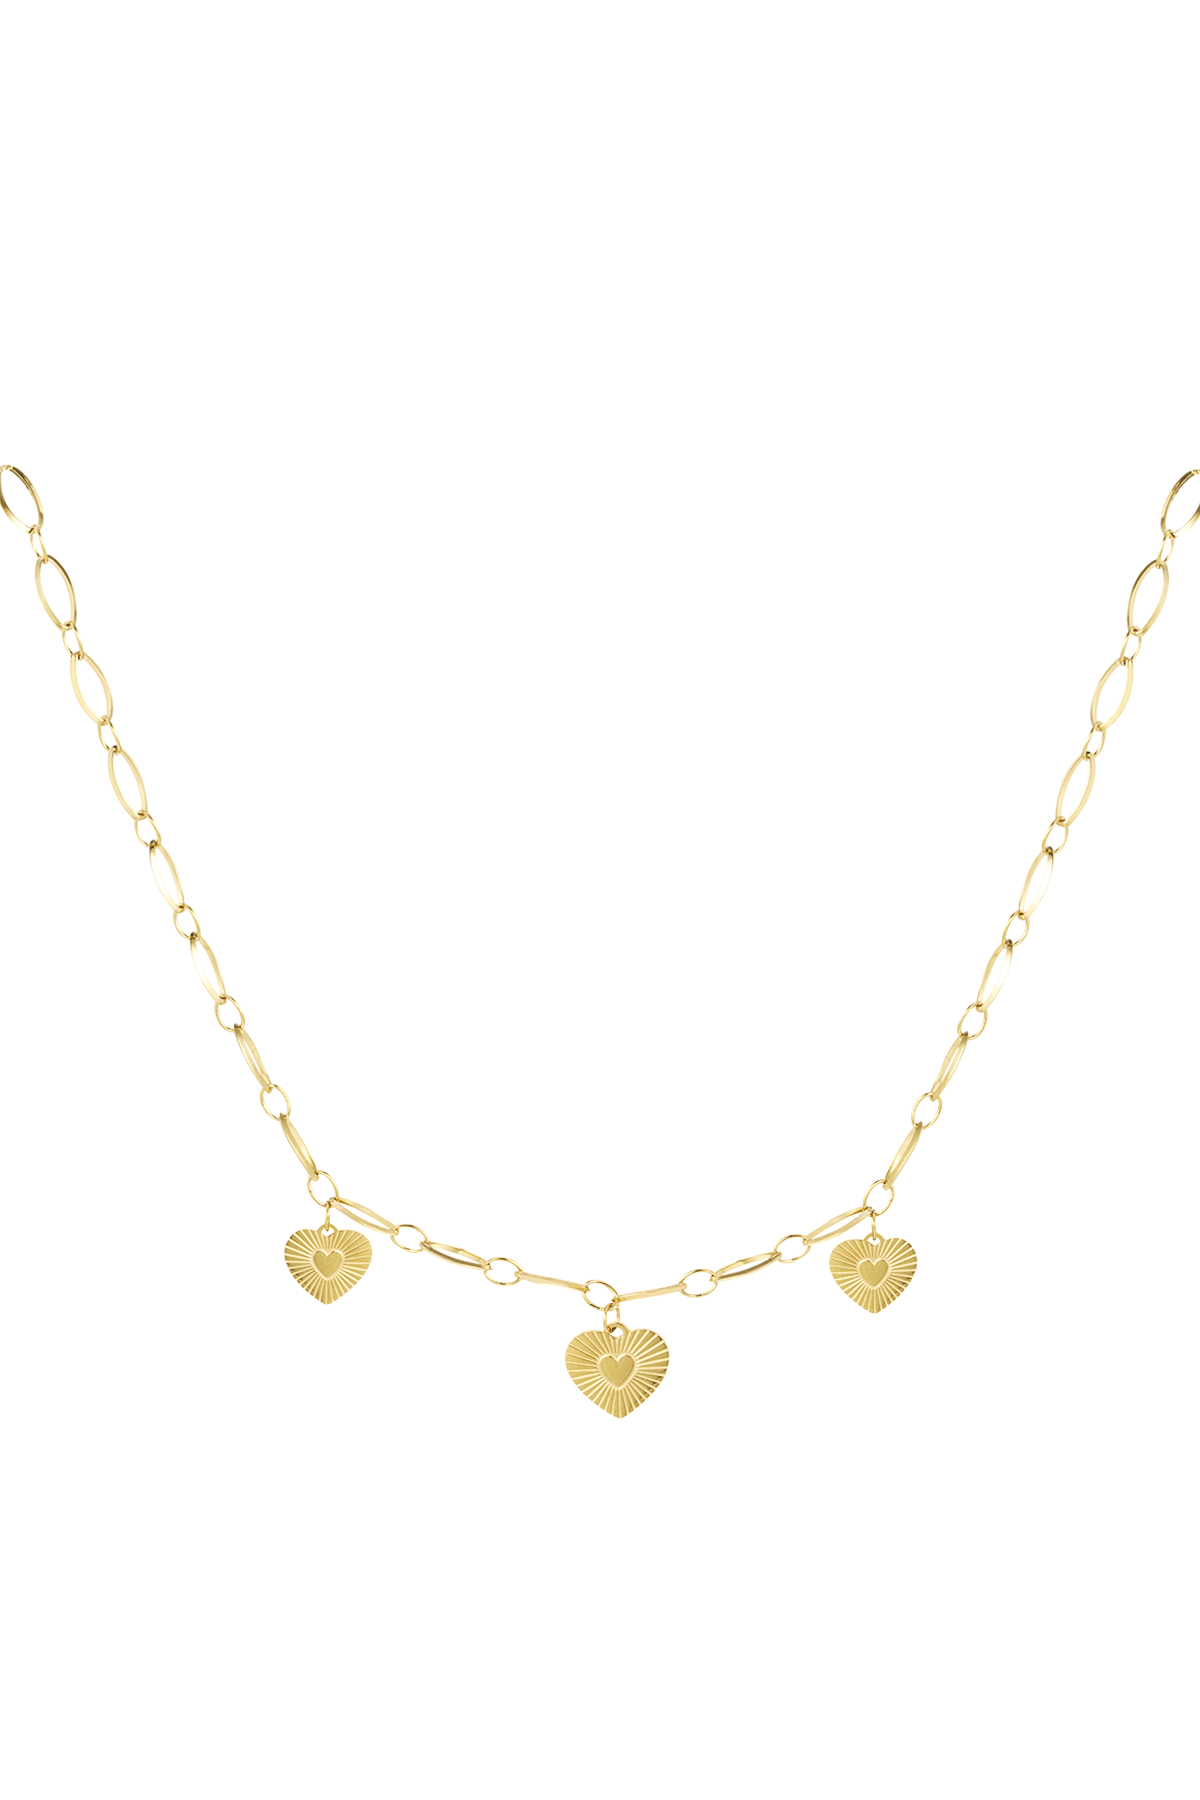 Necklace three hearts coins - gold 